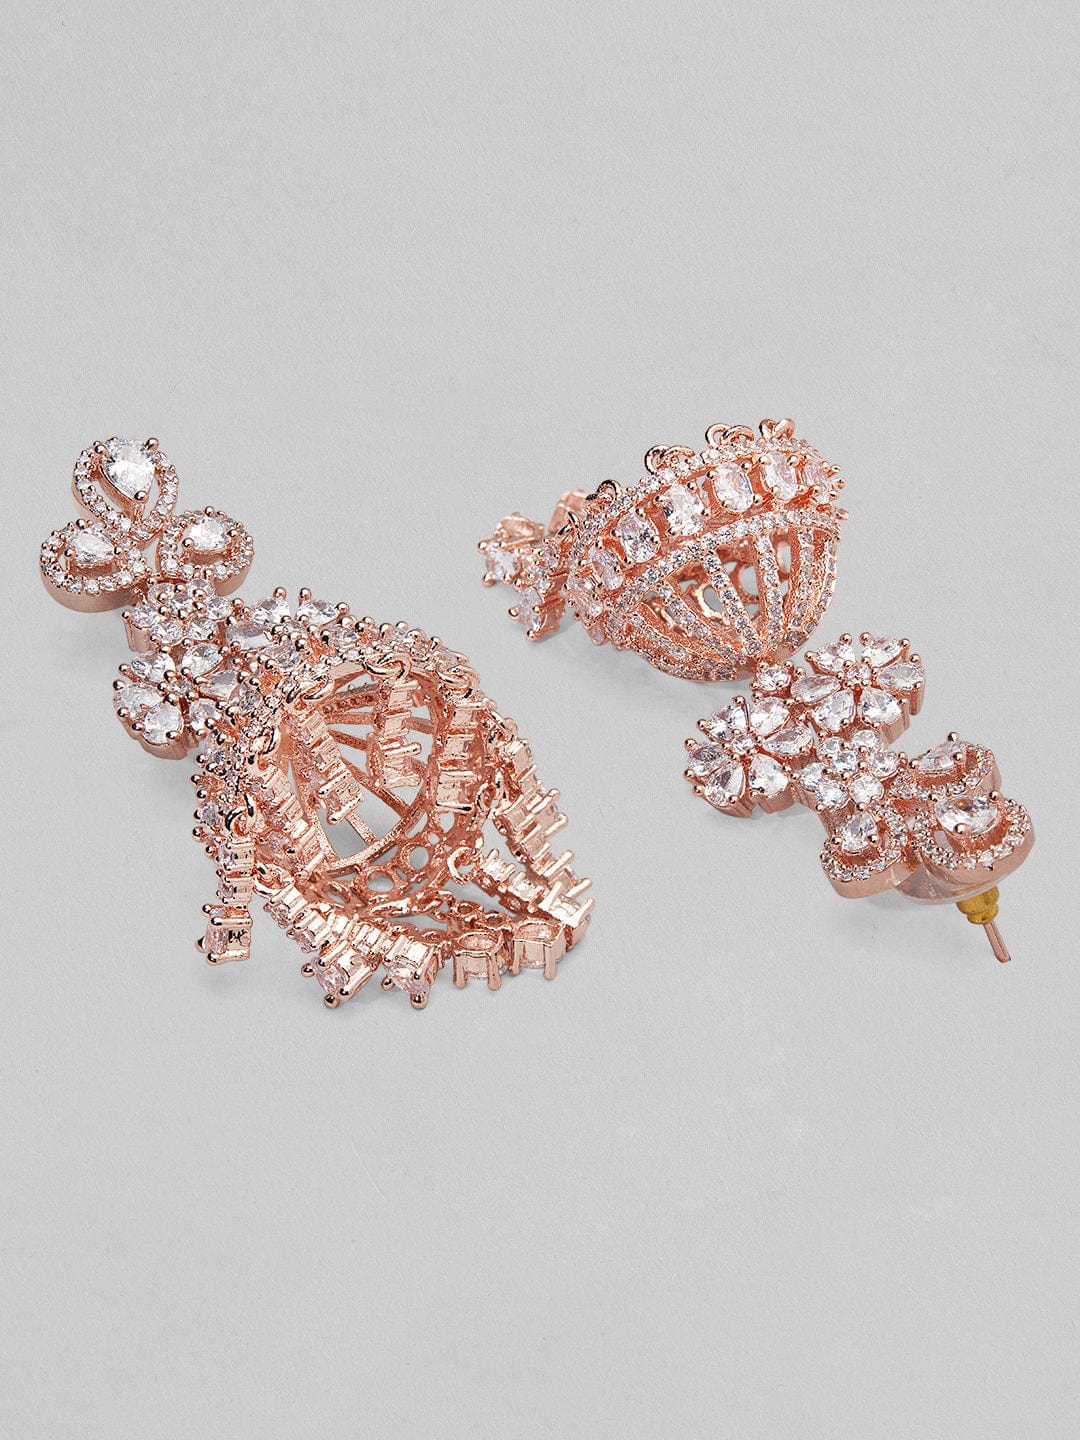 Rubans rose gold plated jhumka earrings with studded american stones. Earrings